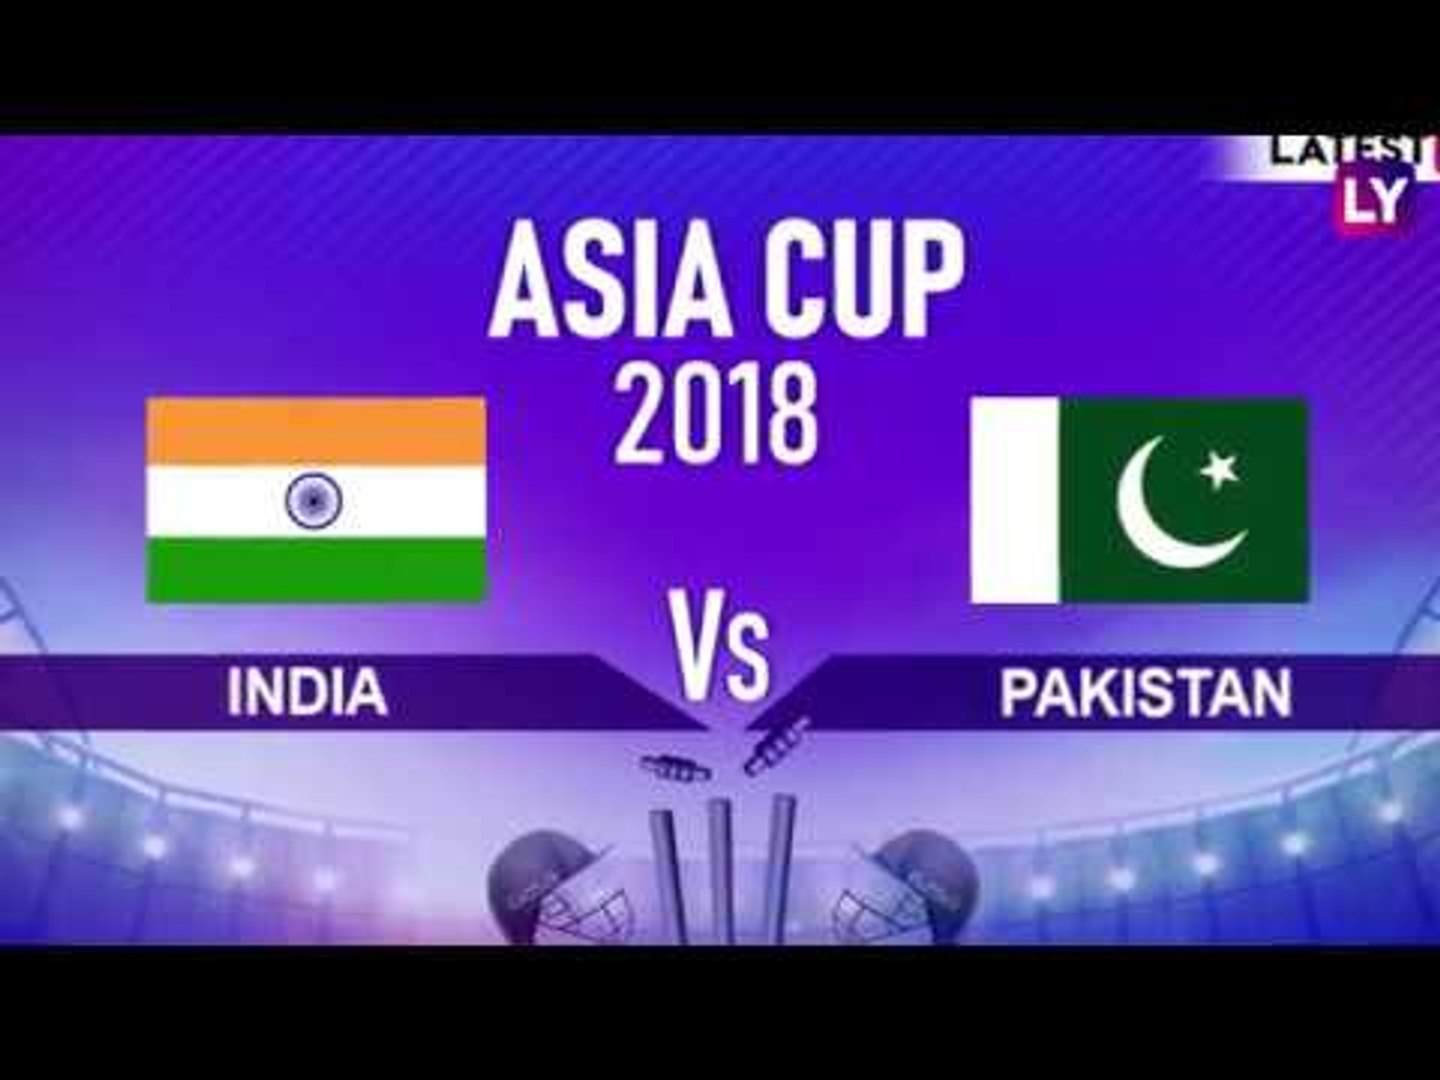 India vs Pakistan Asia Cup 2018 Match Preview: High Voltage Ind vs Pak Clash Predicted!